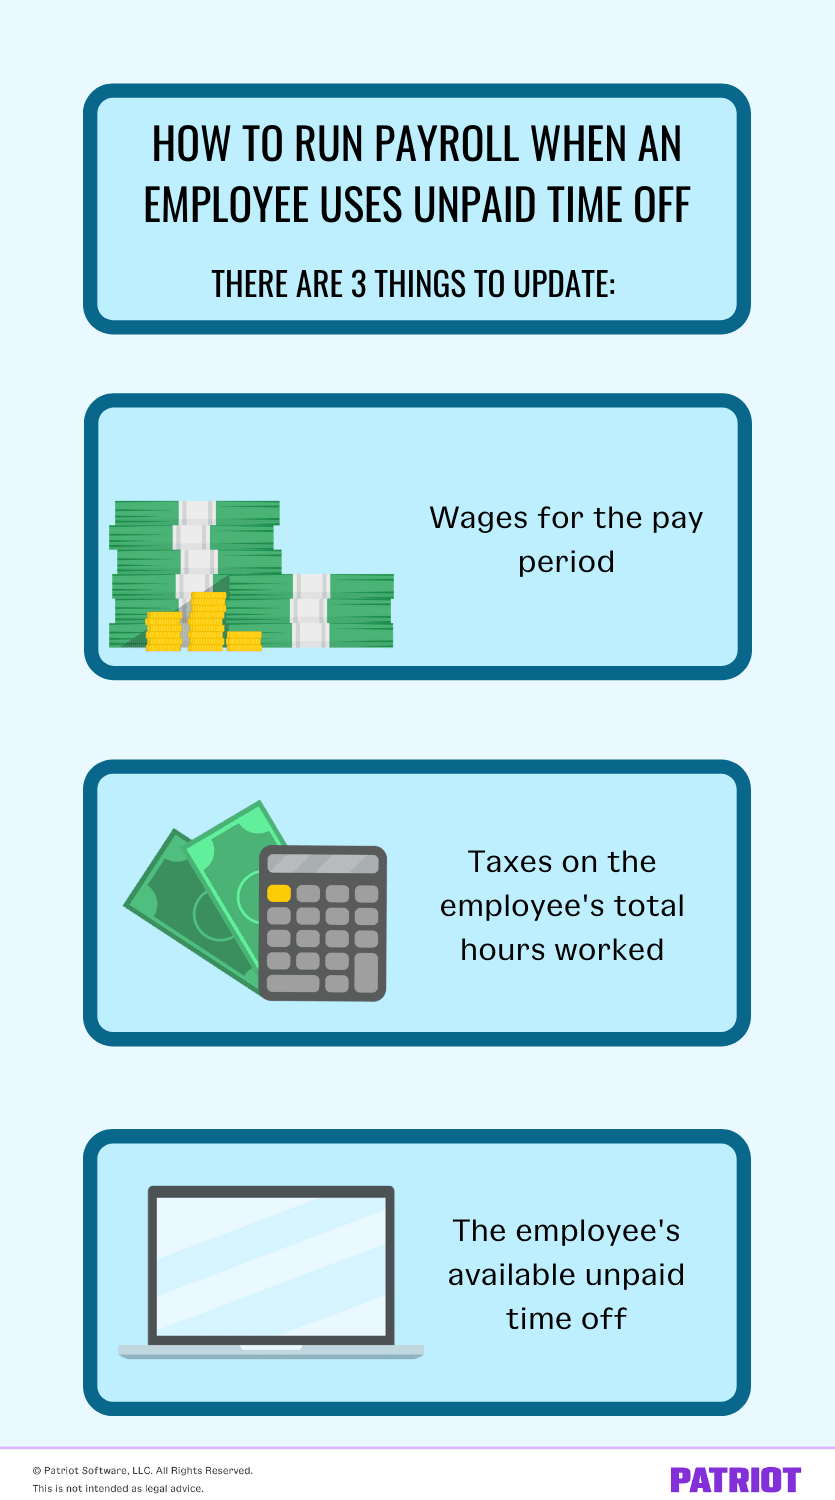 running payroll when an employee uses unpaid time off: update these 3 things 1) wages for the pay period 2) taxes on the employee's total hours worked 3) The employee's available unpaid time off